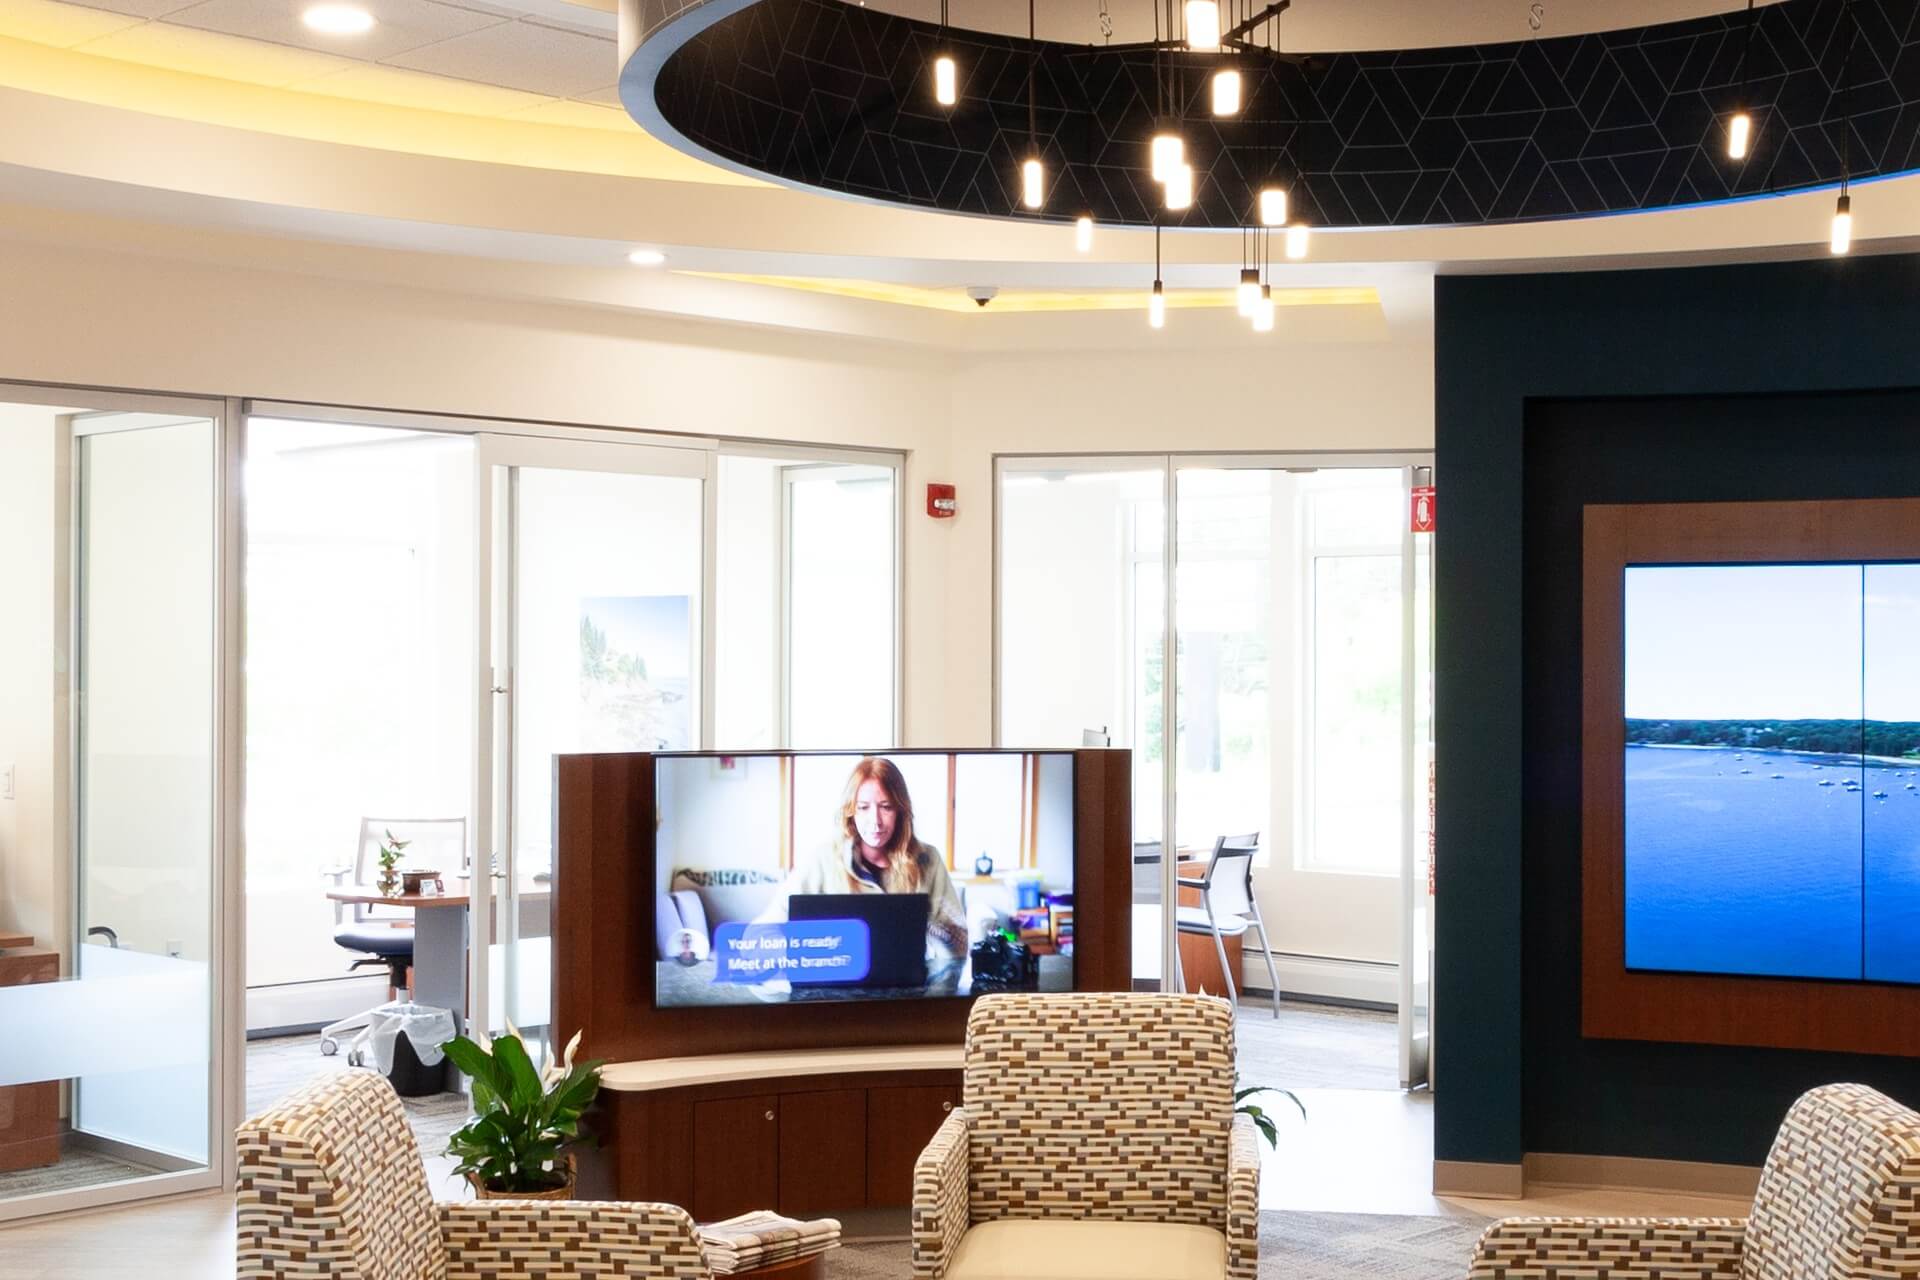 Image of the spacious and modern waiting area inside Maine State credit union in Rockland.